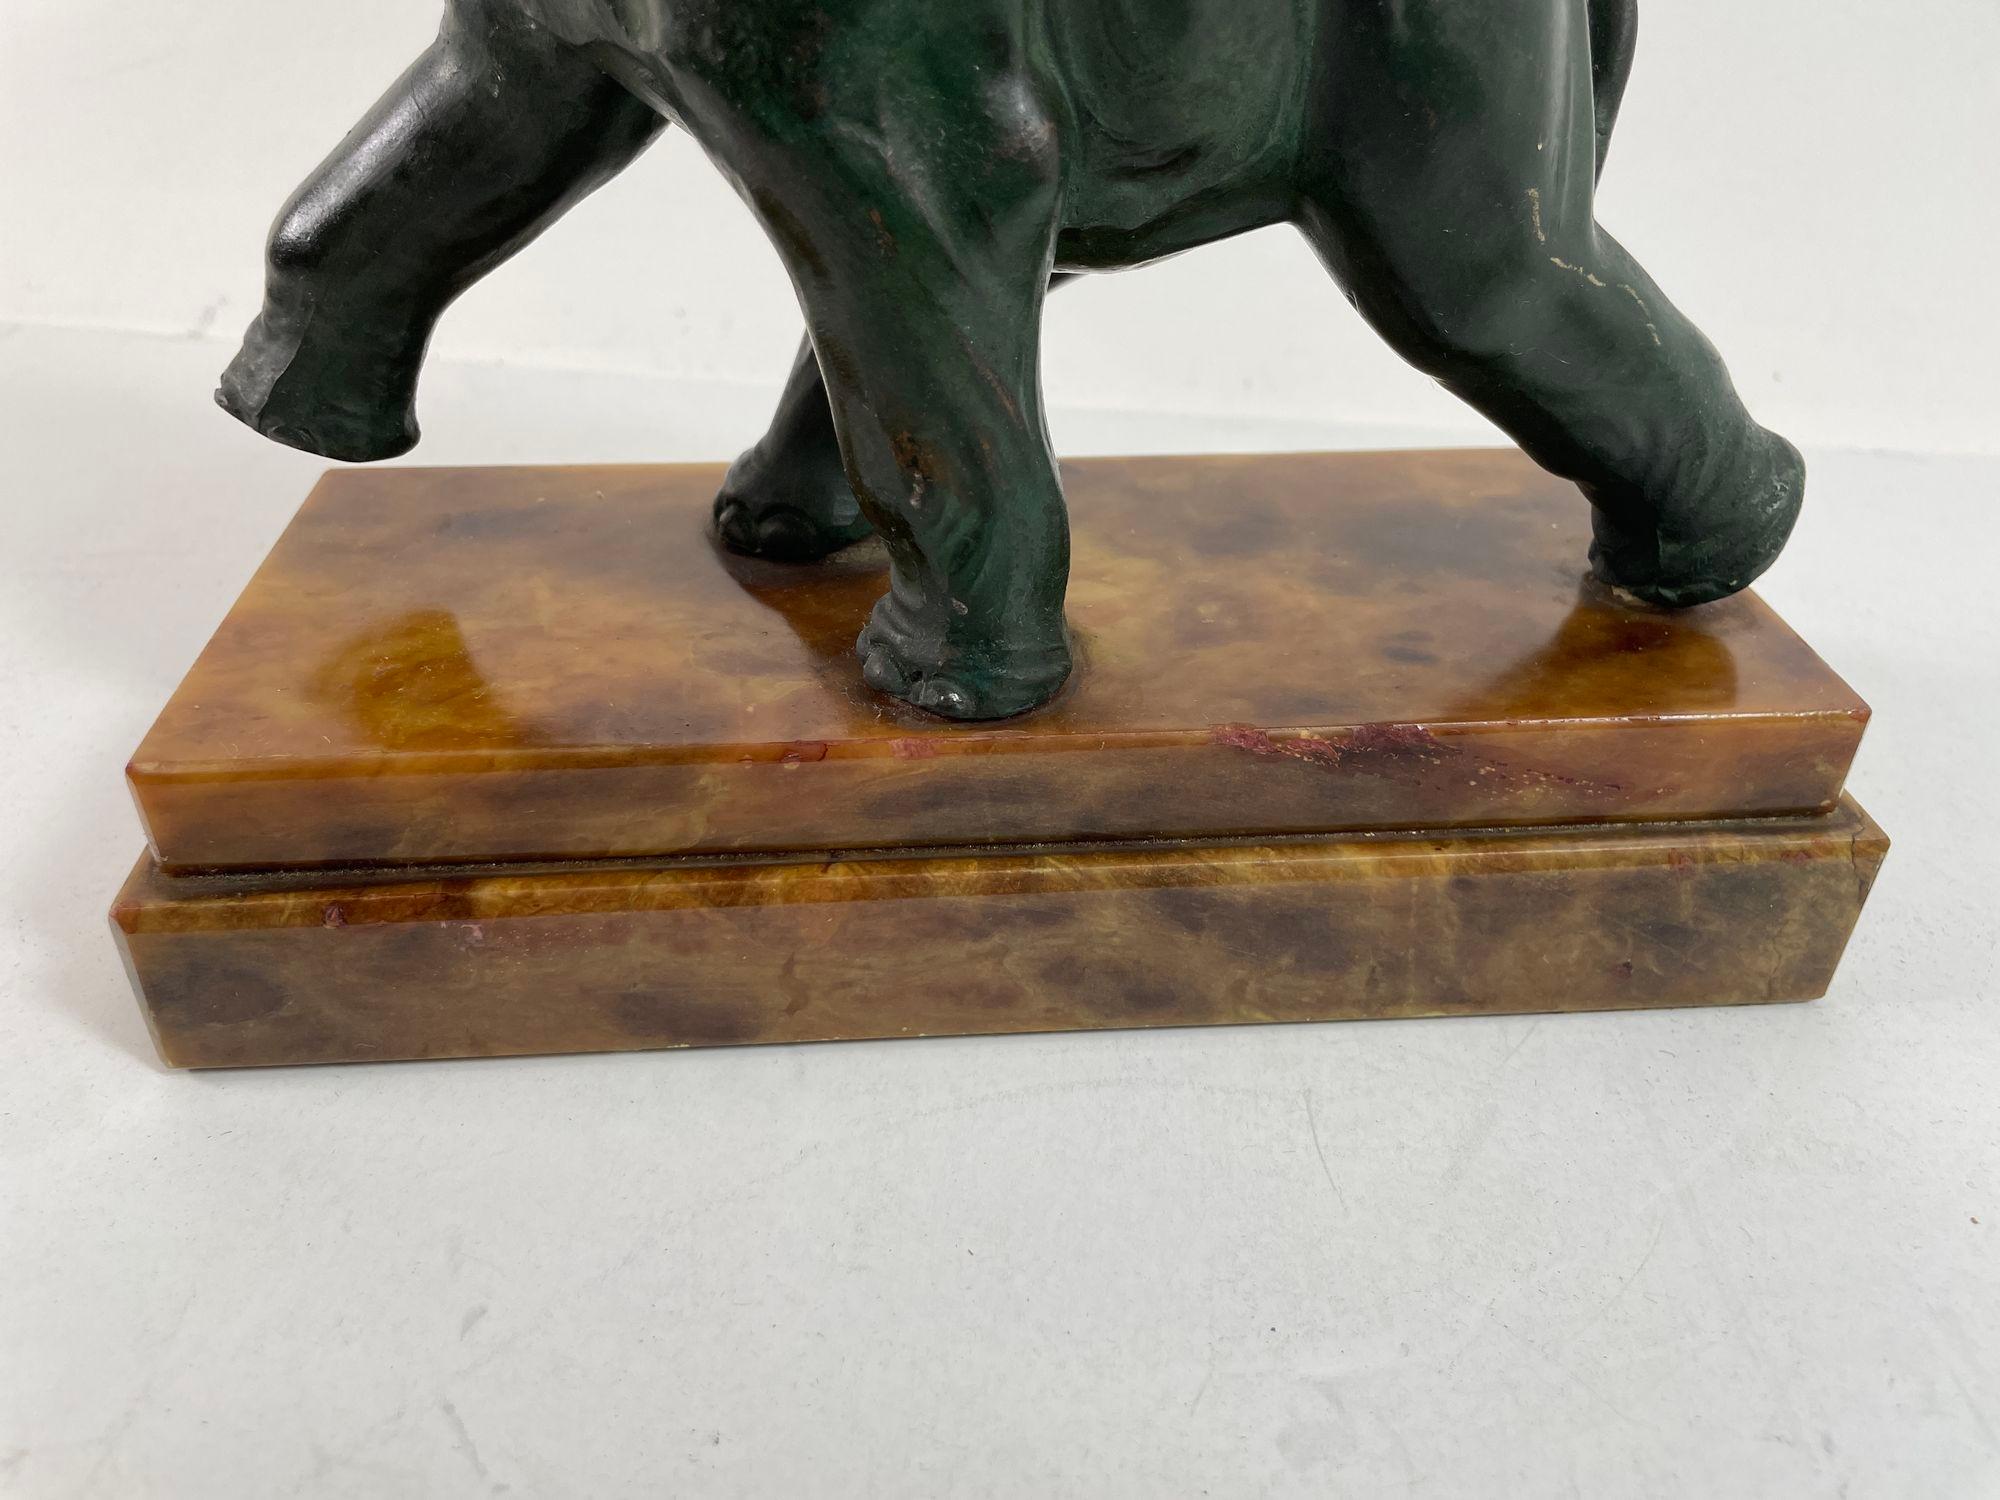 Art Deco Bronze Elephant Sculpture with Raised Trunk Made in Italy For Sale 7